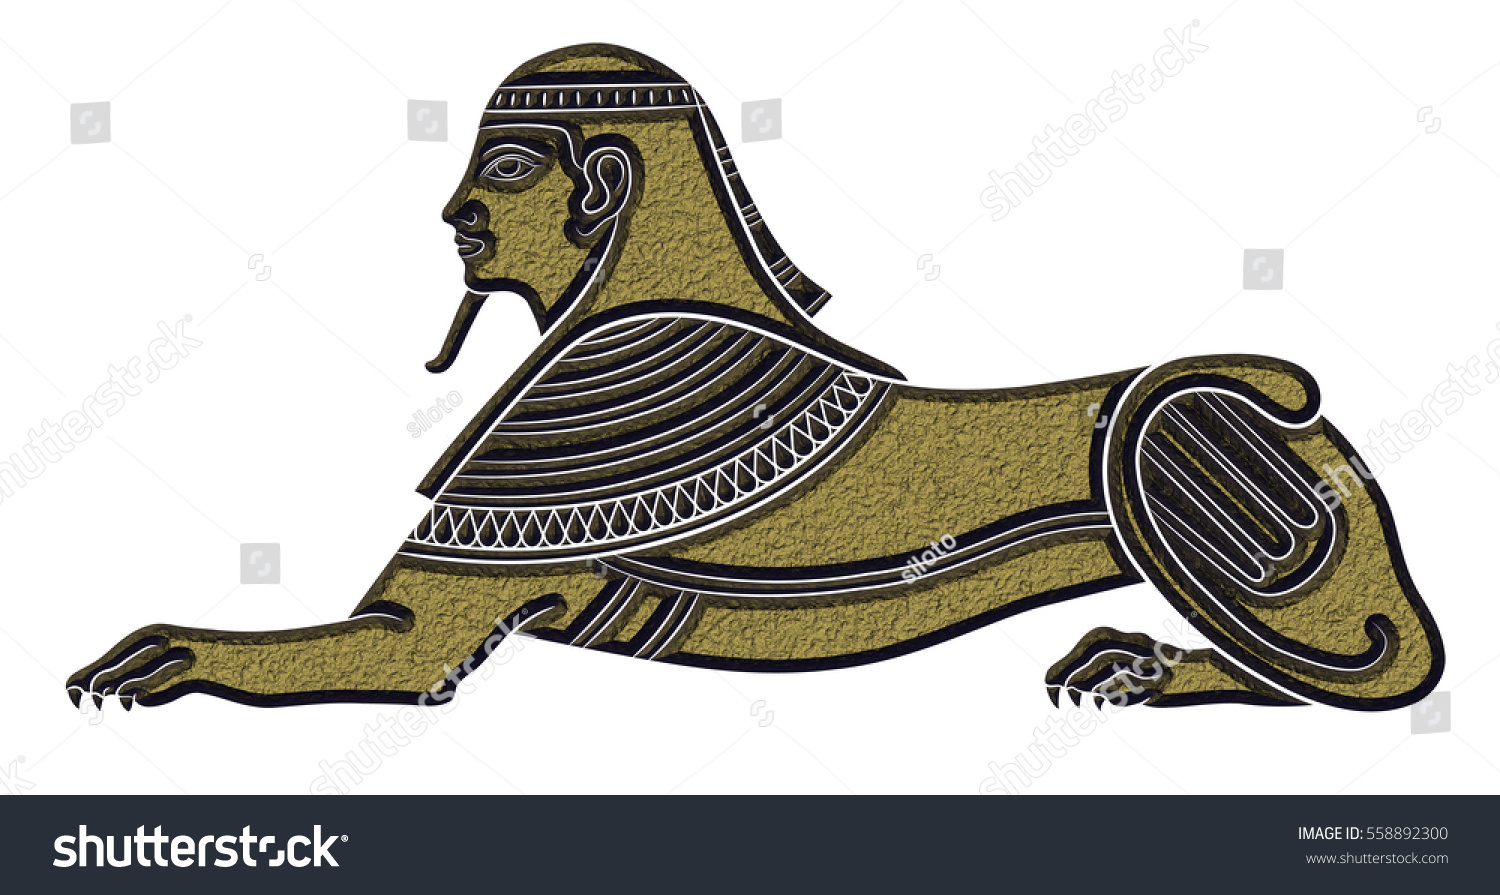 Sphinx Mythical Creature Ancient Egypt のイラスト素材